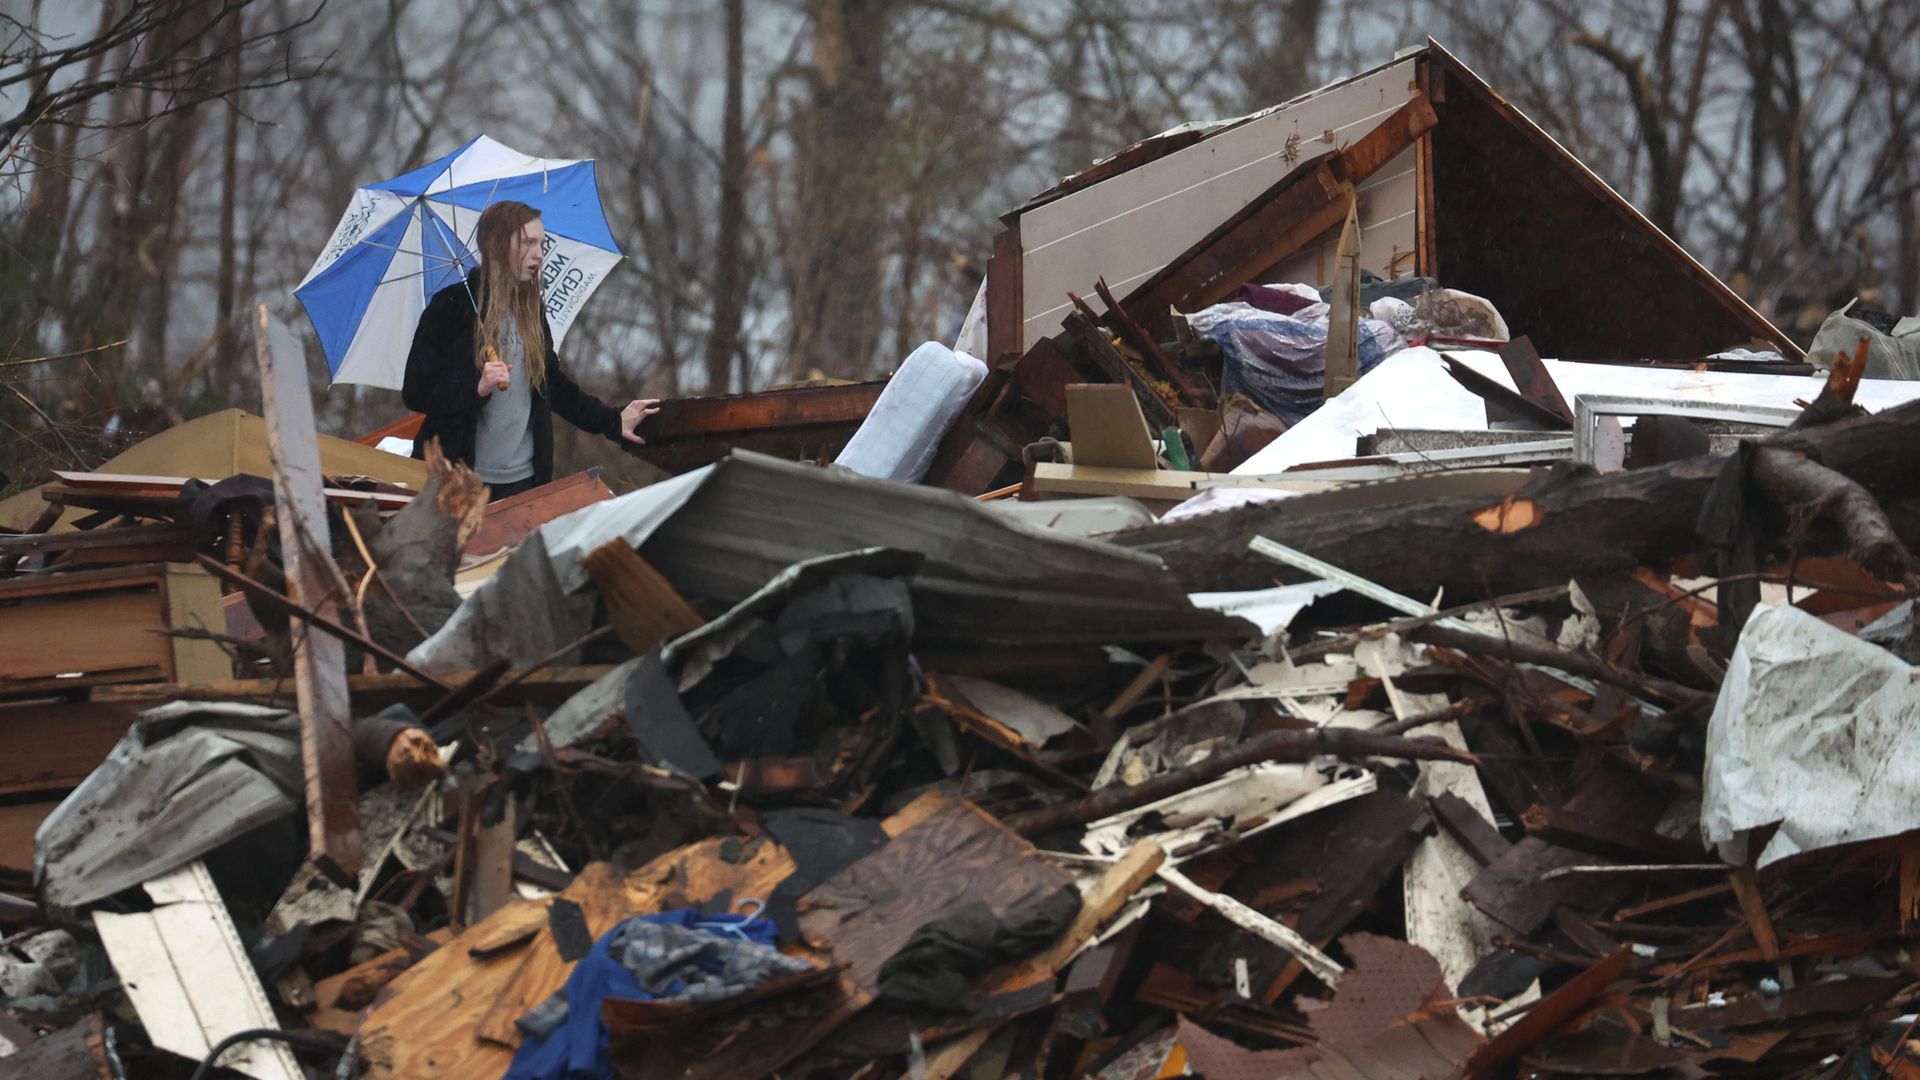  Loren Grable searches in the rain for mementoes in rubble that was once her grandparents' home before it was destroyed during last week's tornado on December 16, 2021 in Dawson Springs, Kentucky.